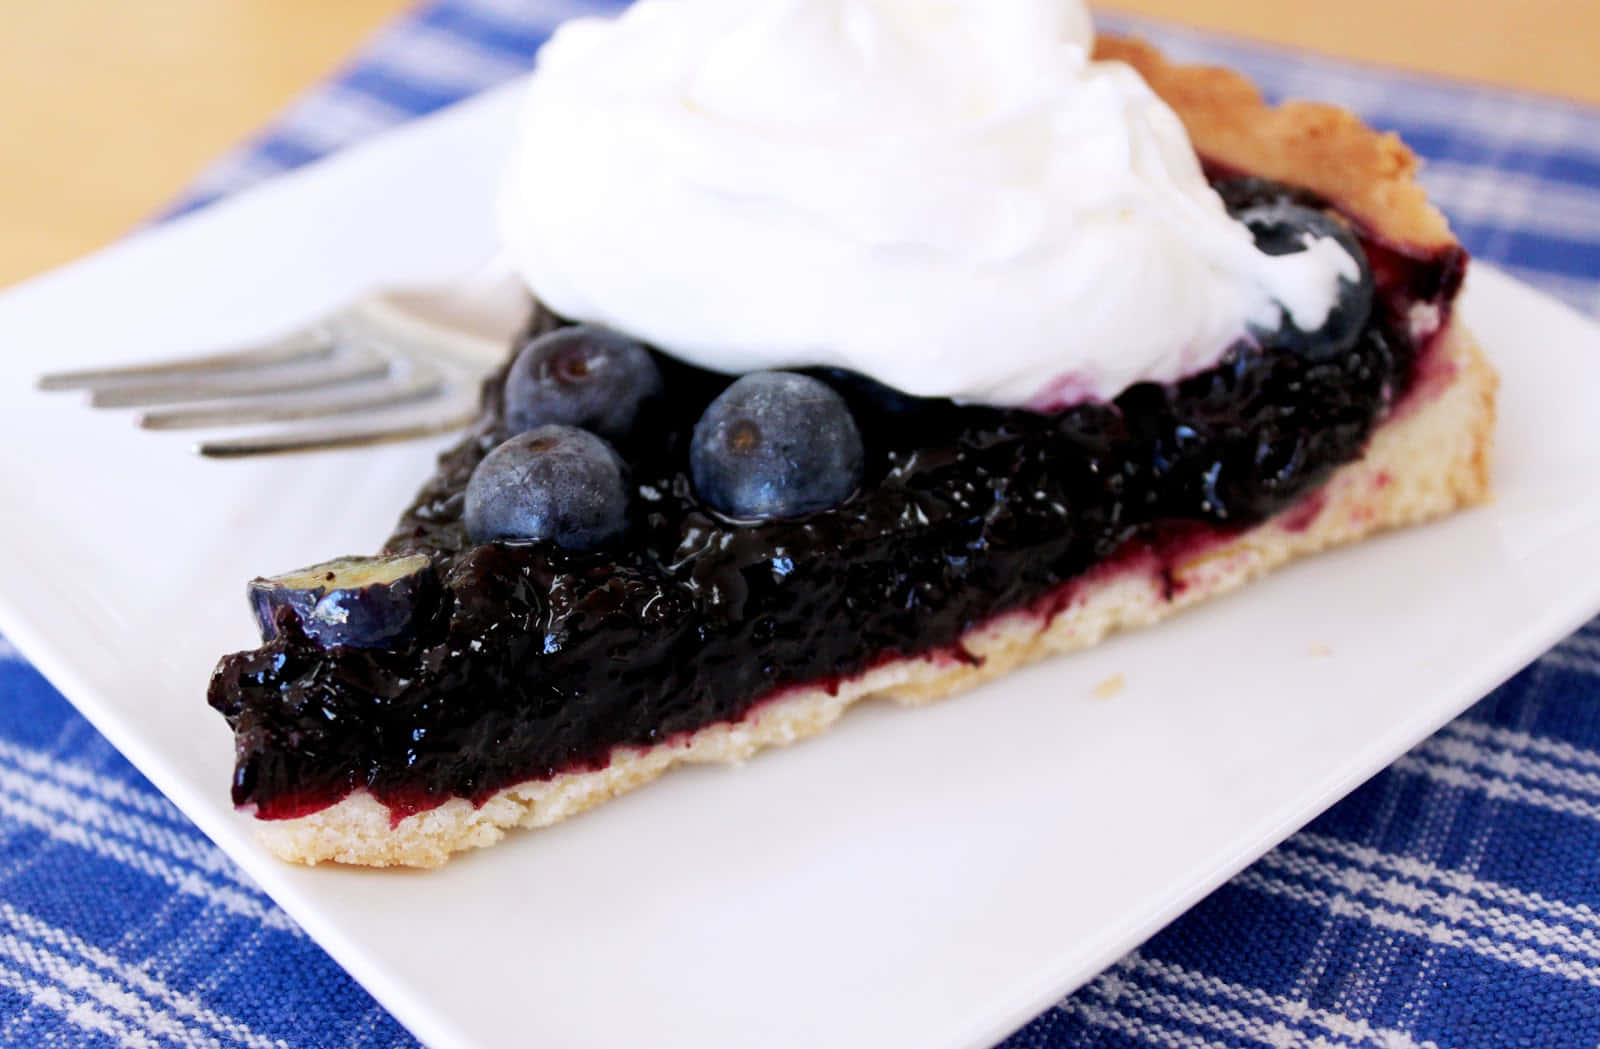 A freshly-baked blueberries tart to satisfy your sweet tooth Wallpaper